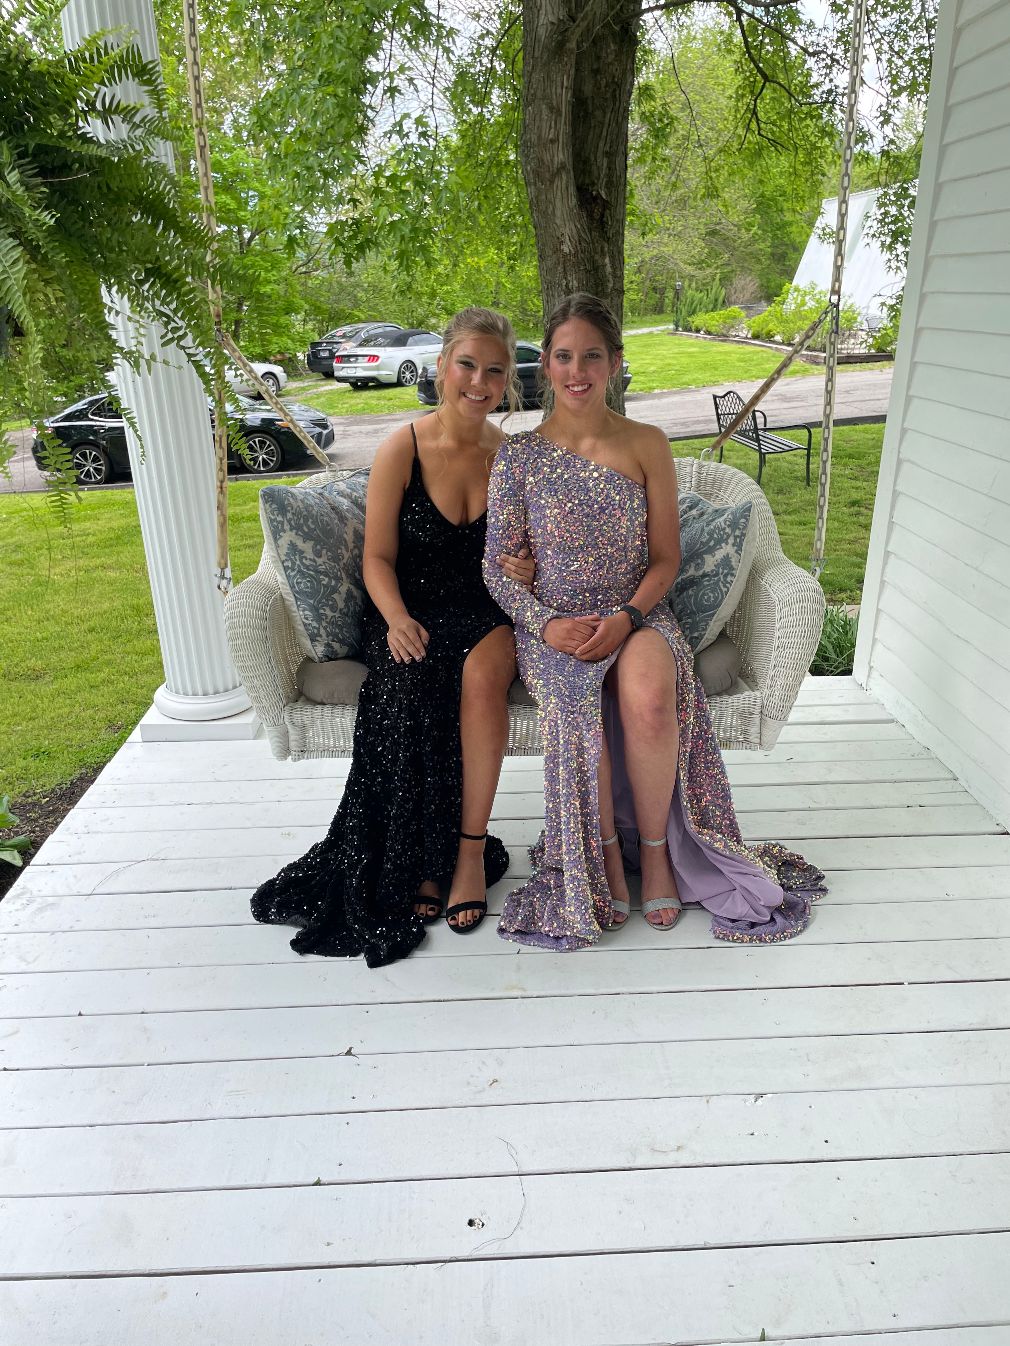 Dressed for Prom, 2 women on the porch swing at the Historic Hayes House<br />
